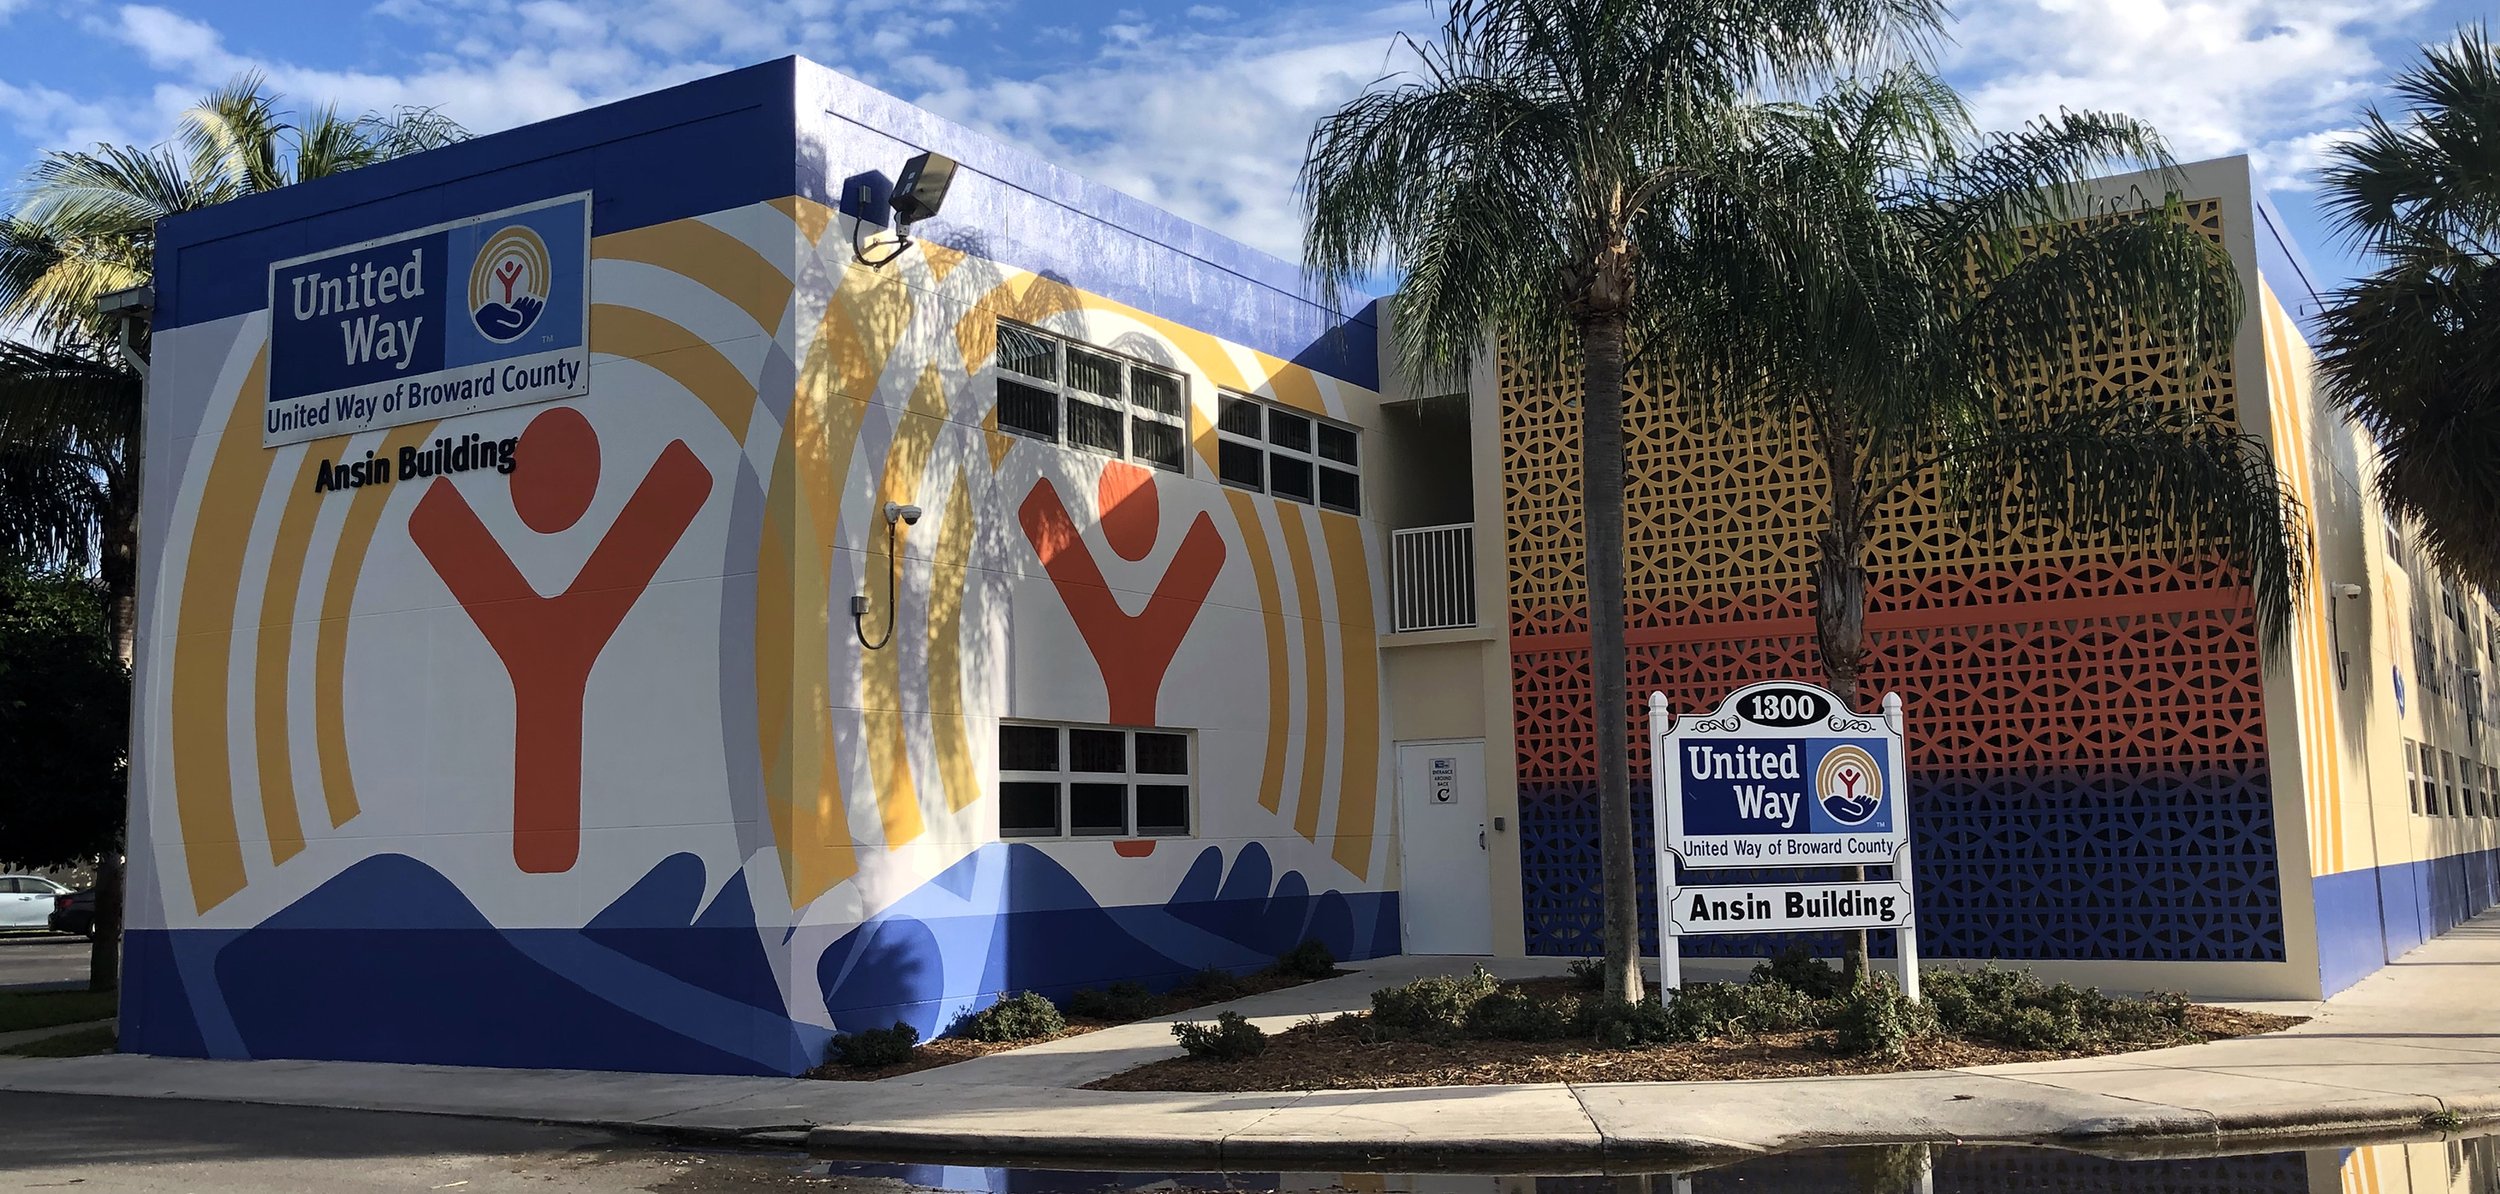   United Way  275’ w x 40’h acrylic on concrete. 2019   commissioned by United Way of Broward County  